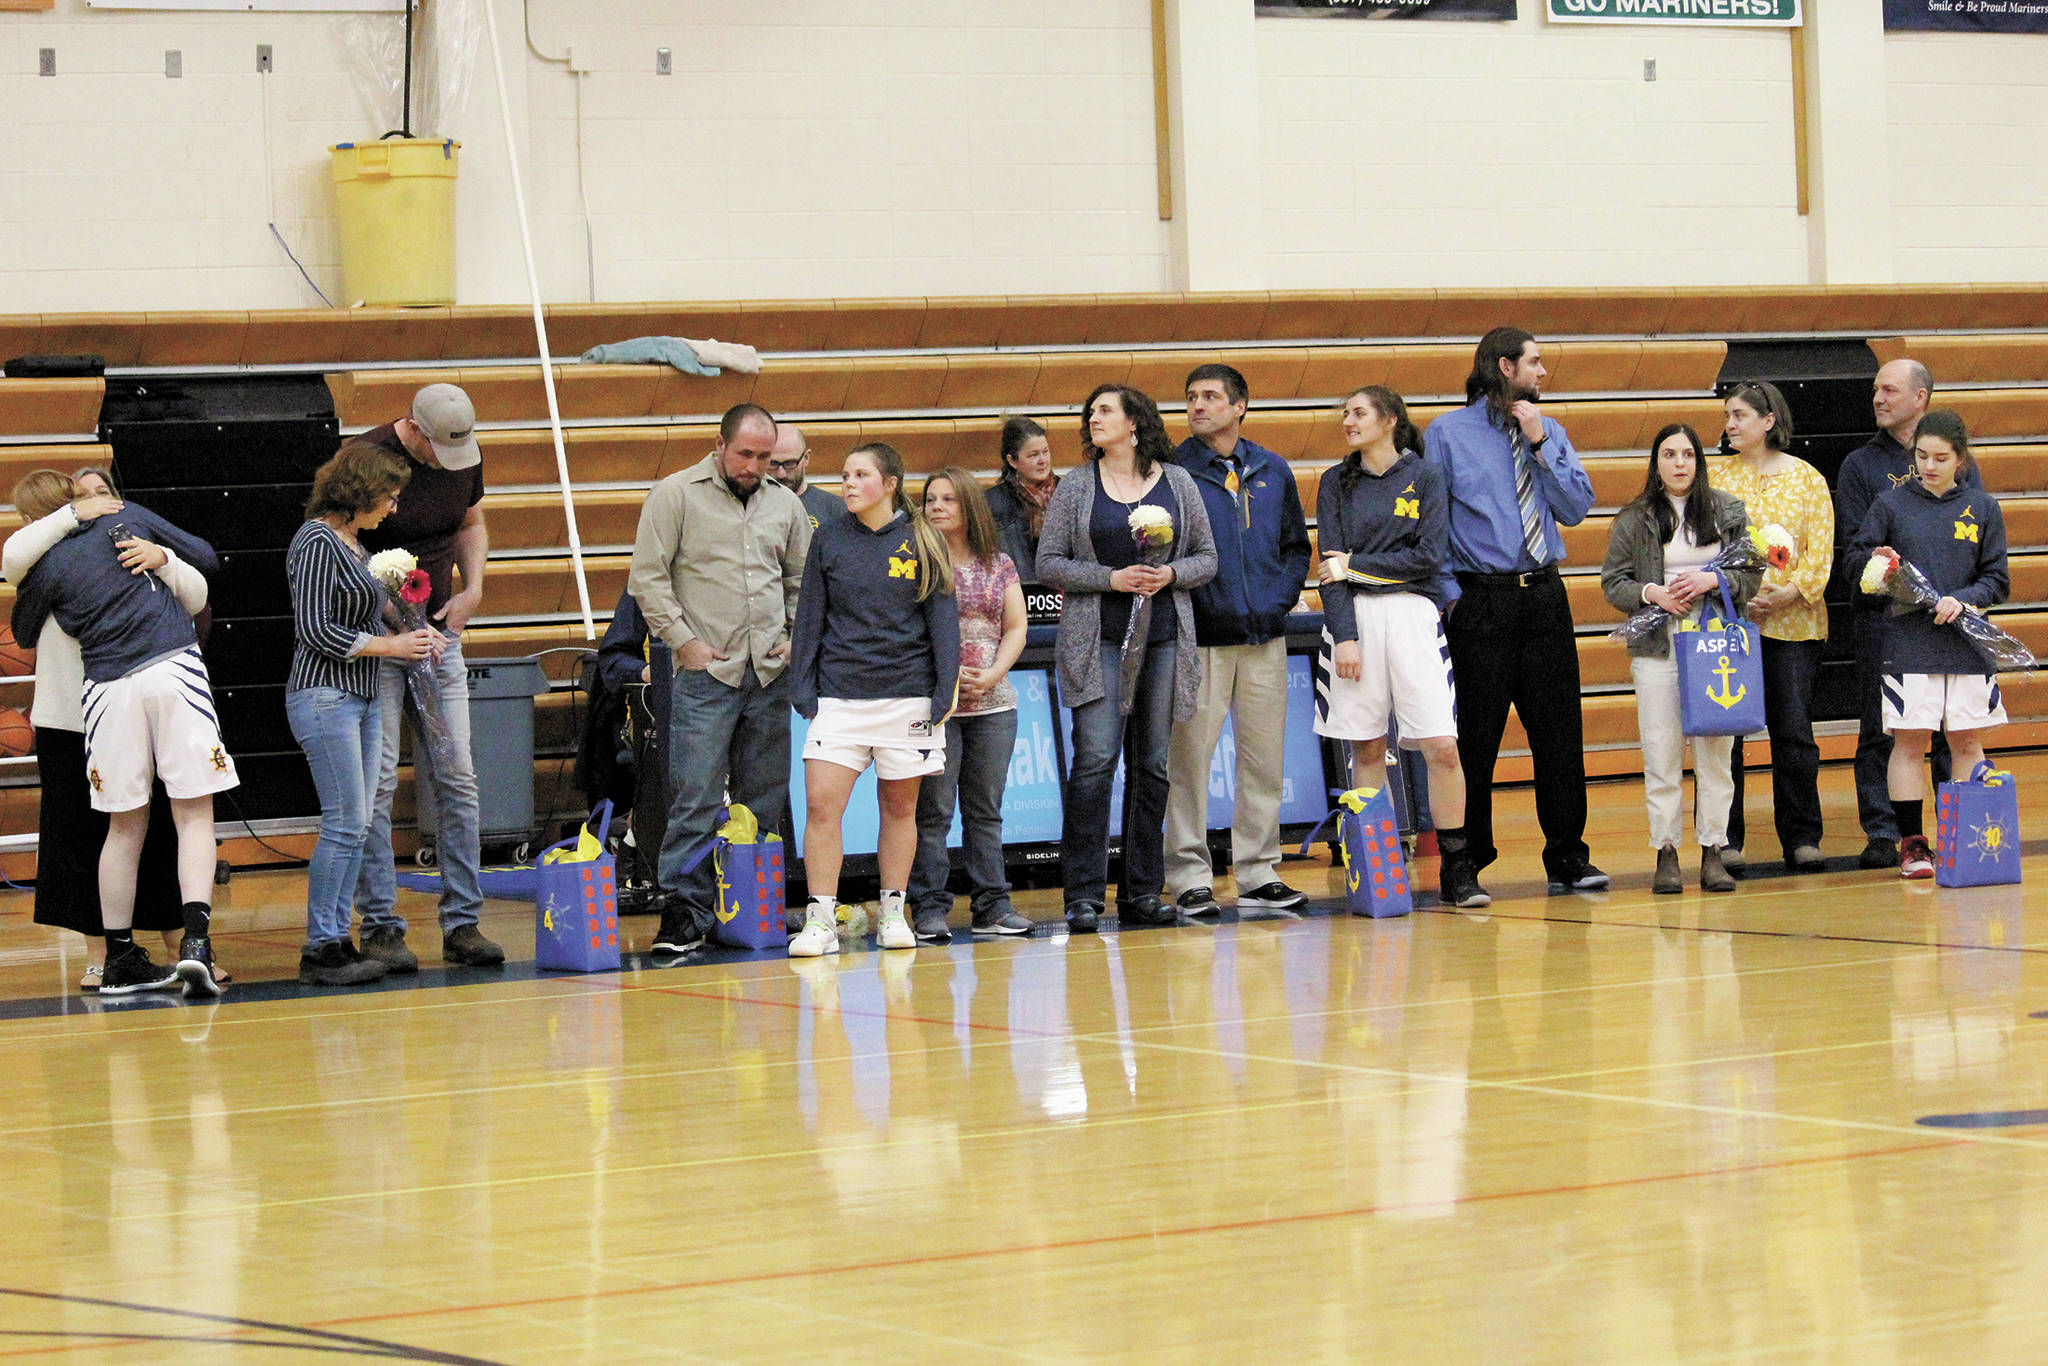 Senior players on the Homer girls basketball team are honored in a senior night ceremony after a Friday, Feb. 28, 2020 game against Nikiski in the Alice Witte Gymnasium in Homer, Alaska. (Photo by Megan Pacer/Homer News)